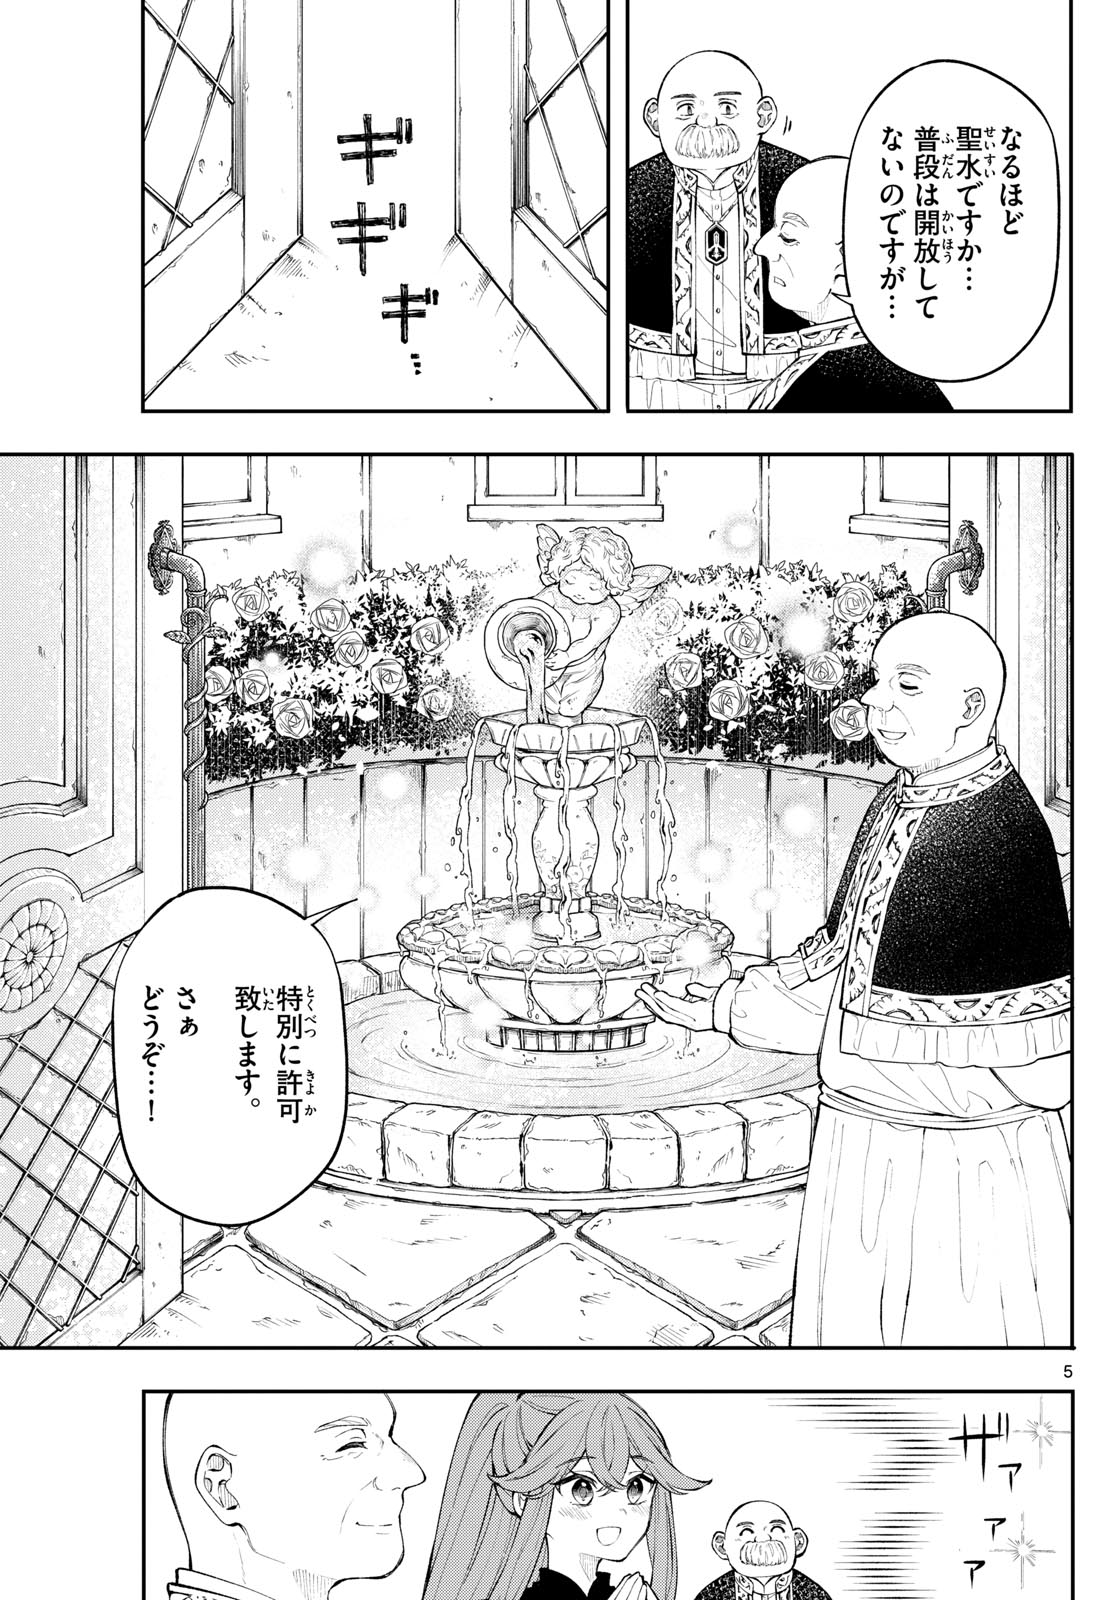 Kaiten no Albus - Chapter 3 - Page 5